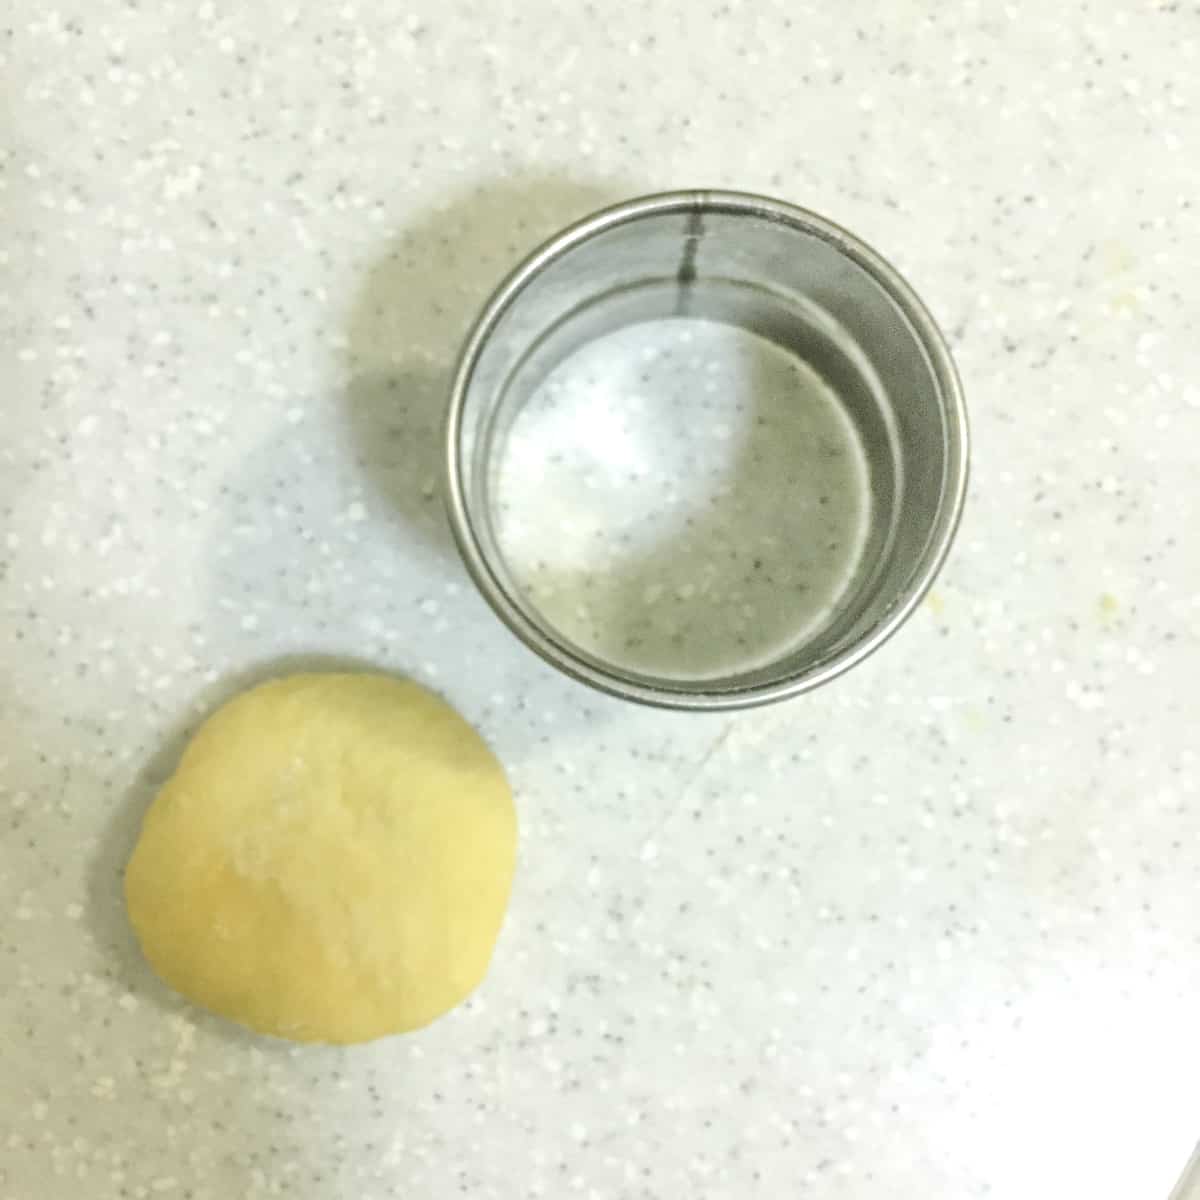 Dough outside a round cutter.